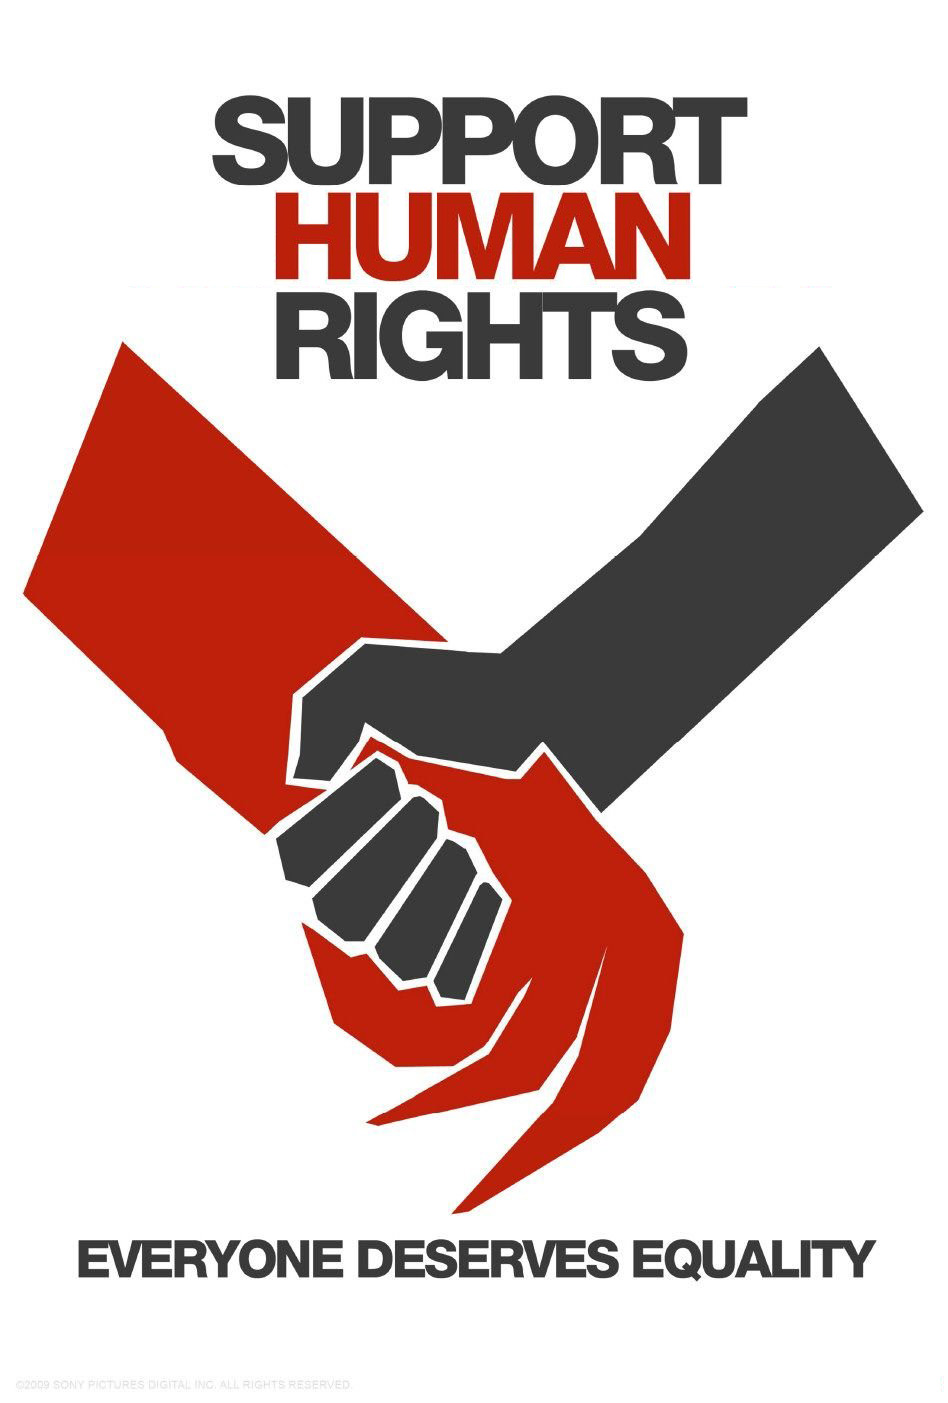 VIEW & SPREAD THE WORD!  URGENT LPH HUMAN RIGHTS COMPLAINT!